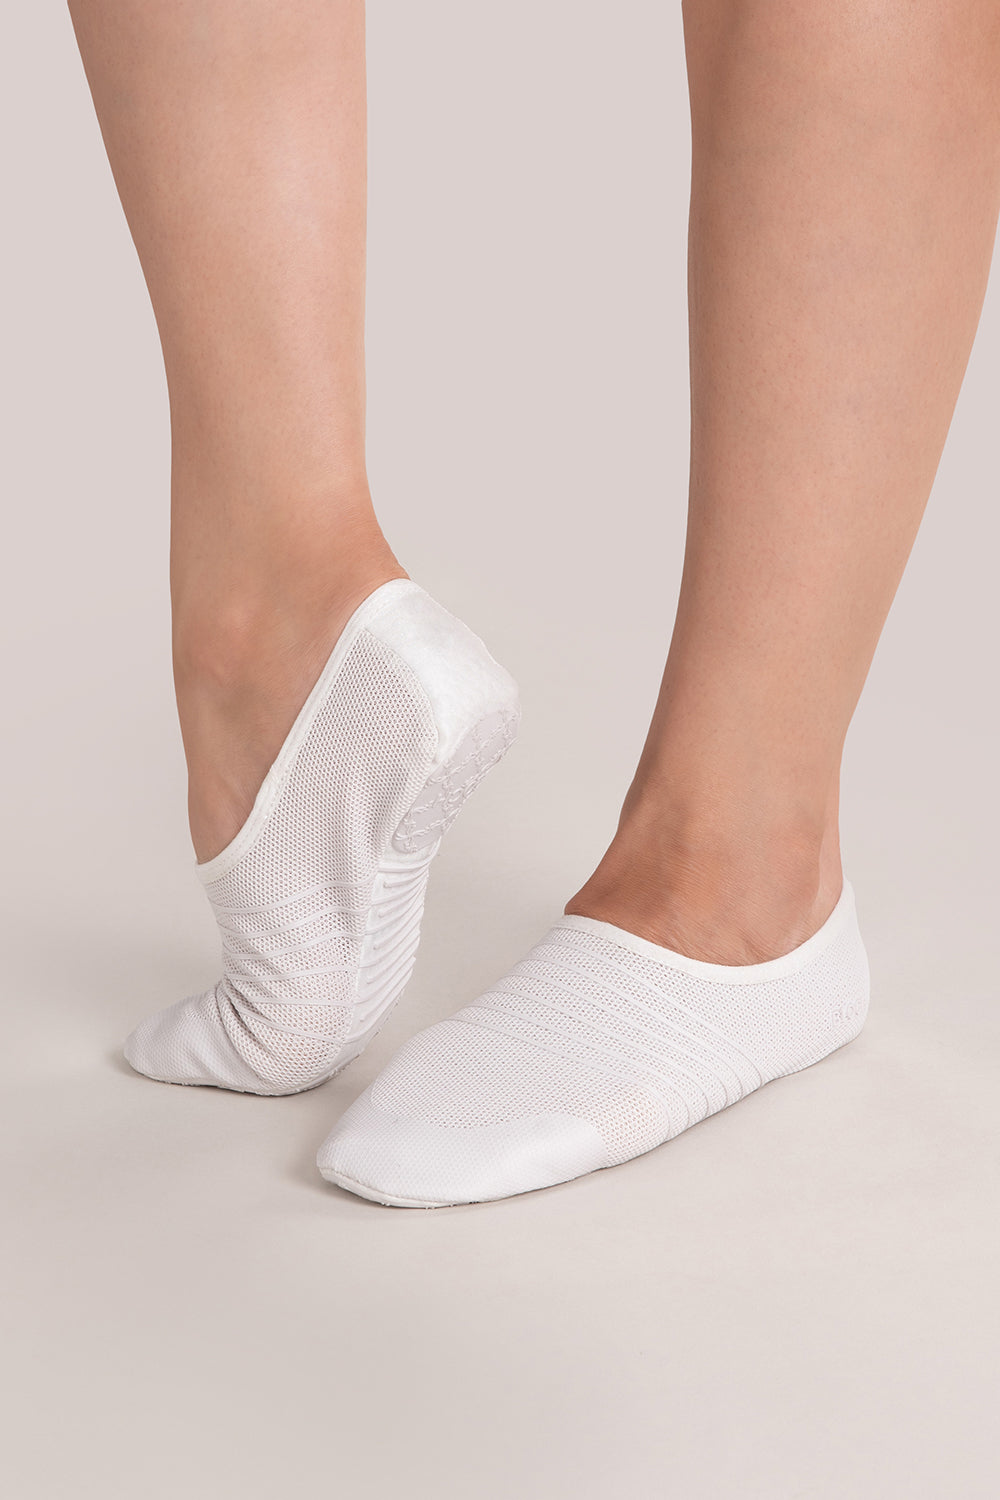 Bloch to Launch Activewear, Studio Shoe for Pilates and Yoga - Yahoo Sports